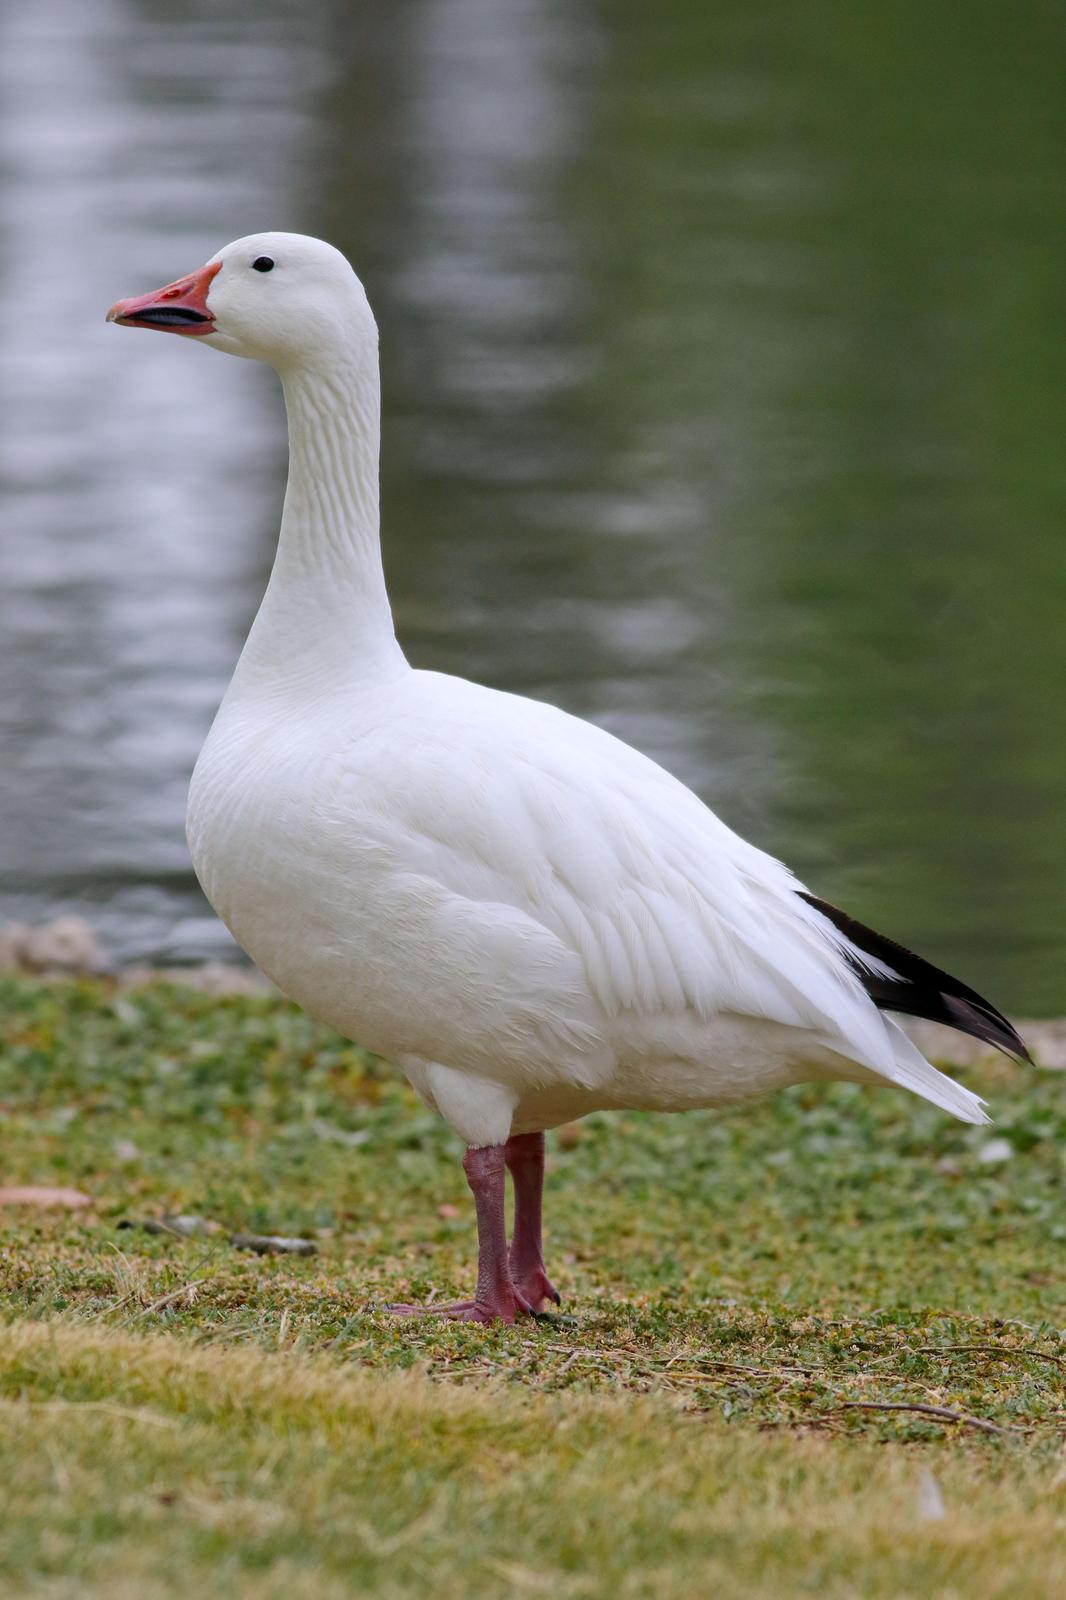 Snow Goose Photo by Tom Ford-Hutchinson